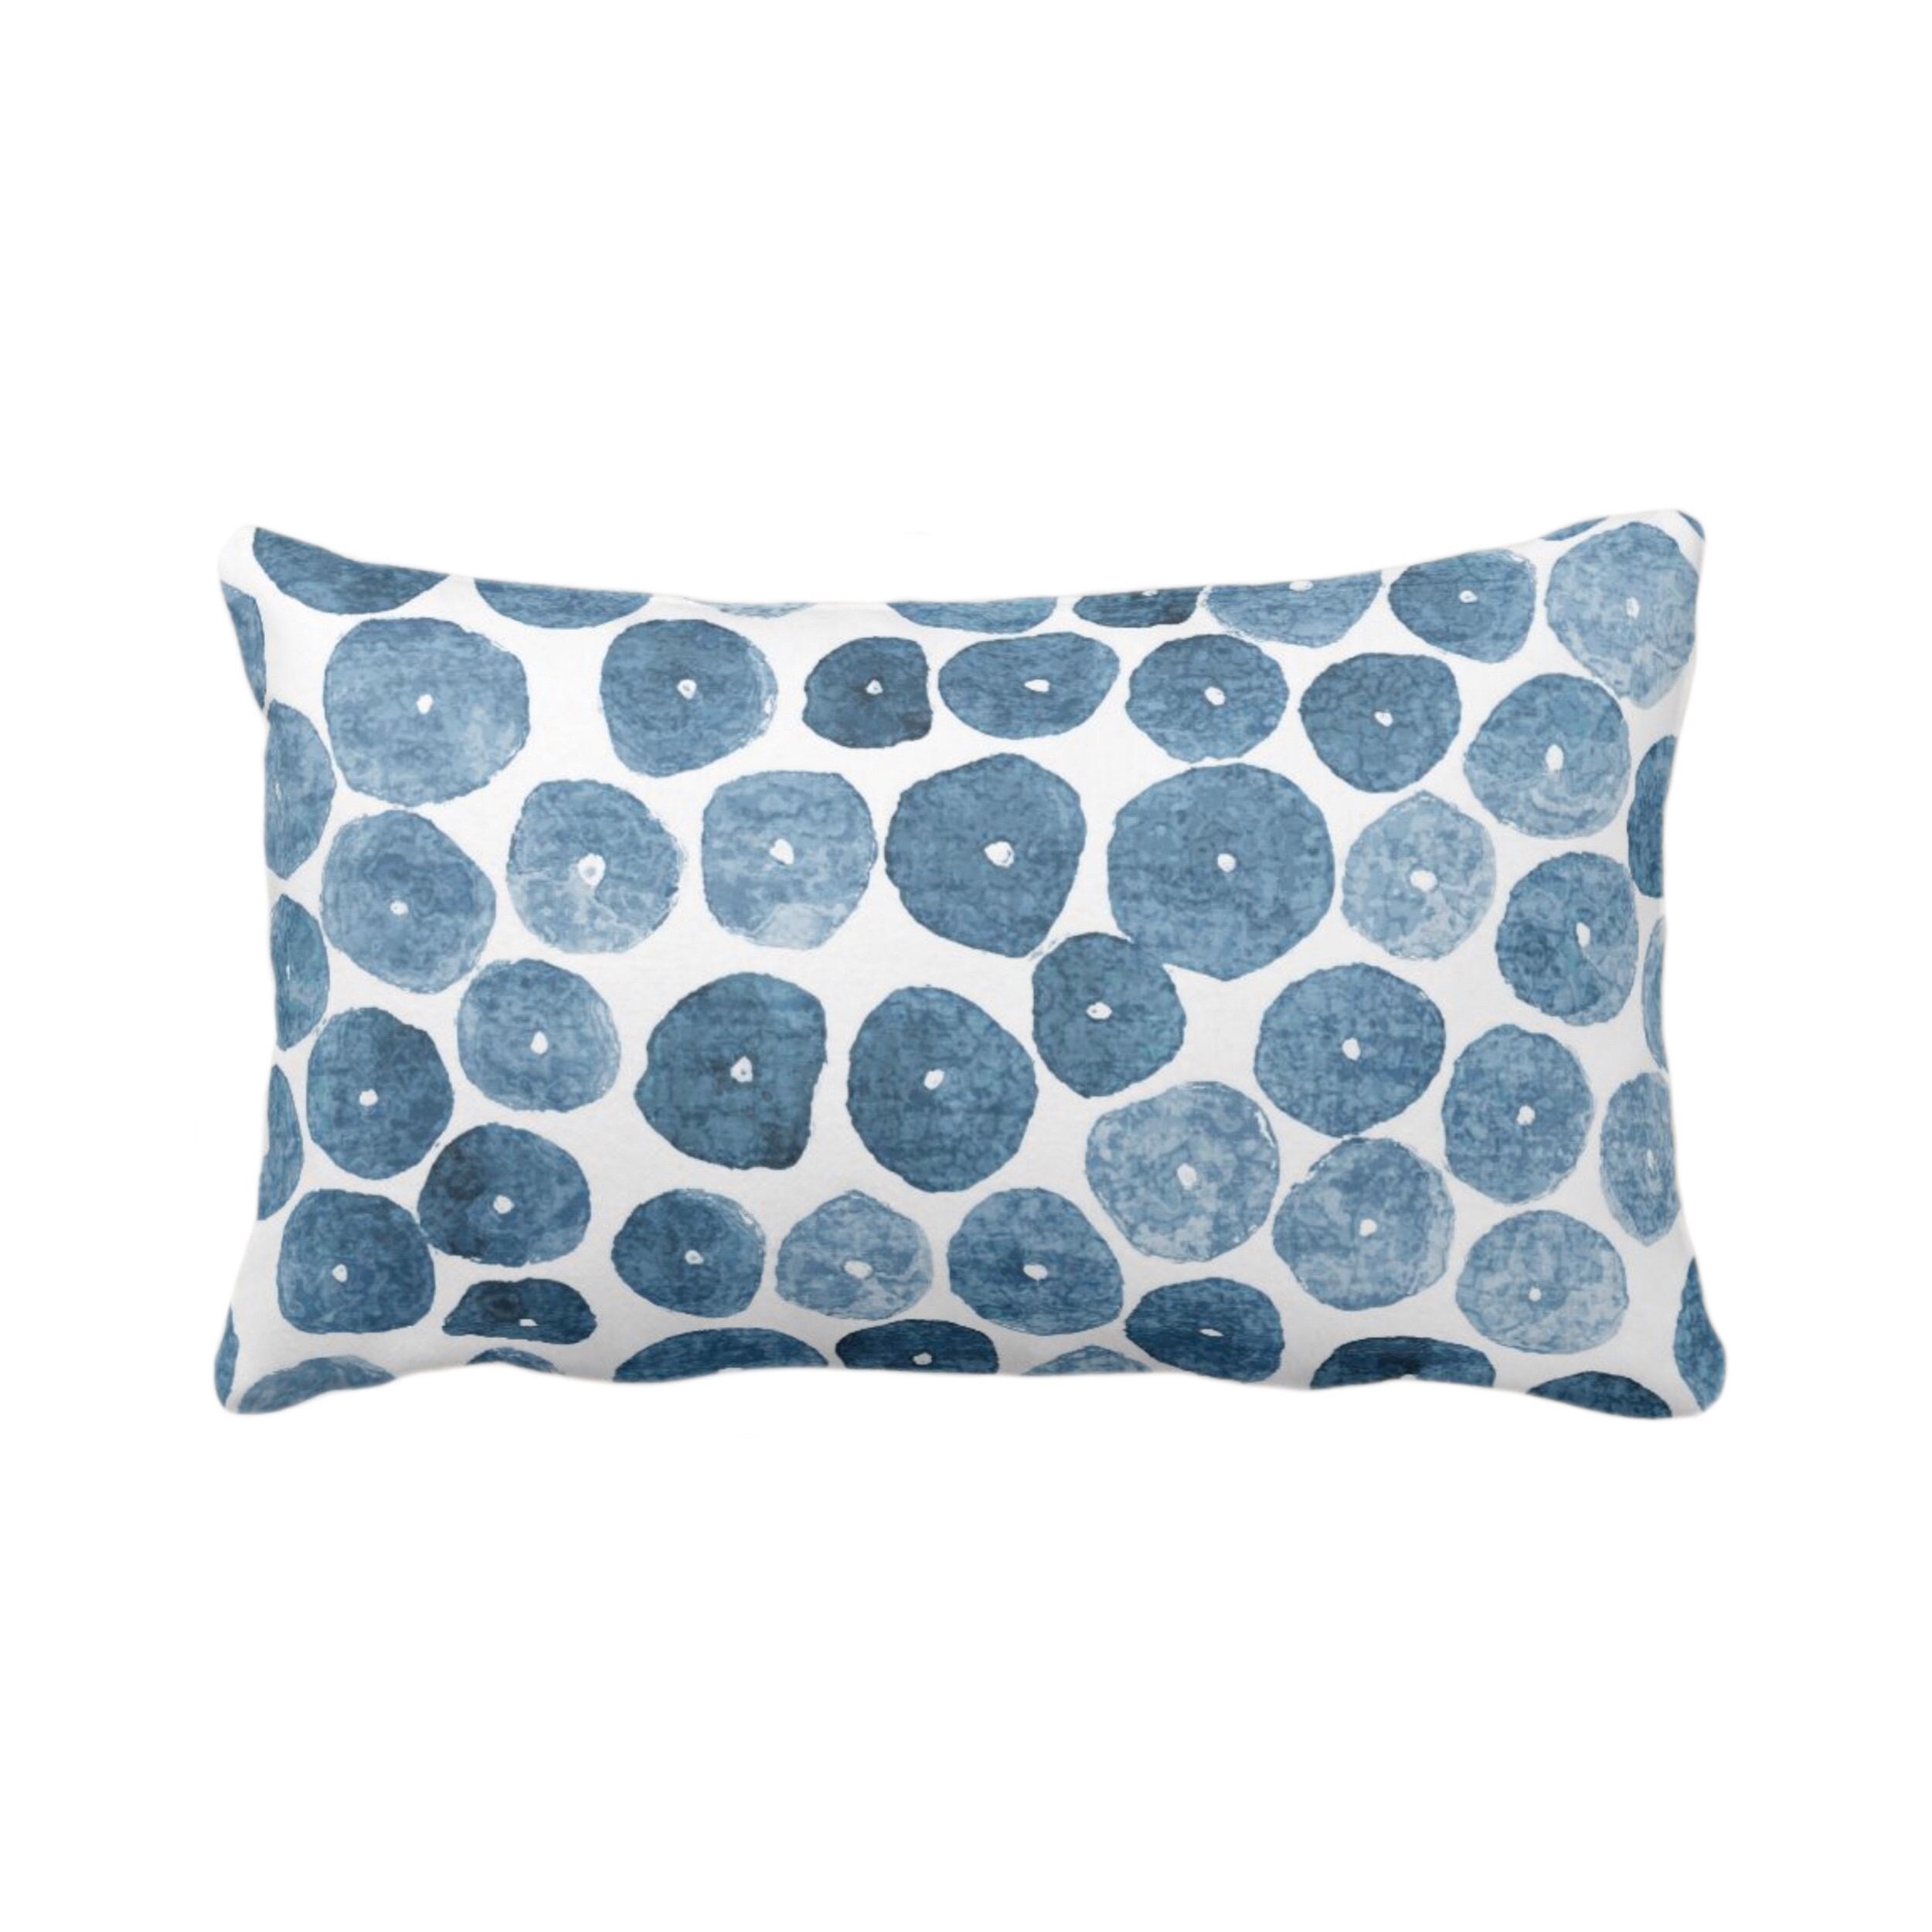 Free Form Watercolor Throw Pillow/Cover, Lake Blue 12 x 20 Lumbar Pillows/Covers,  Dusty Indigo Painted Abstract/Art/Modern/Minimalist Print